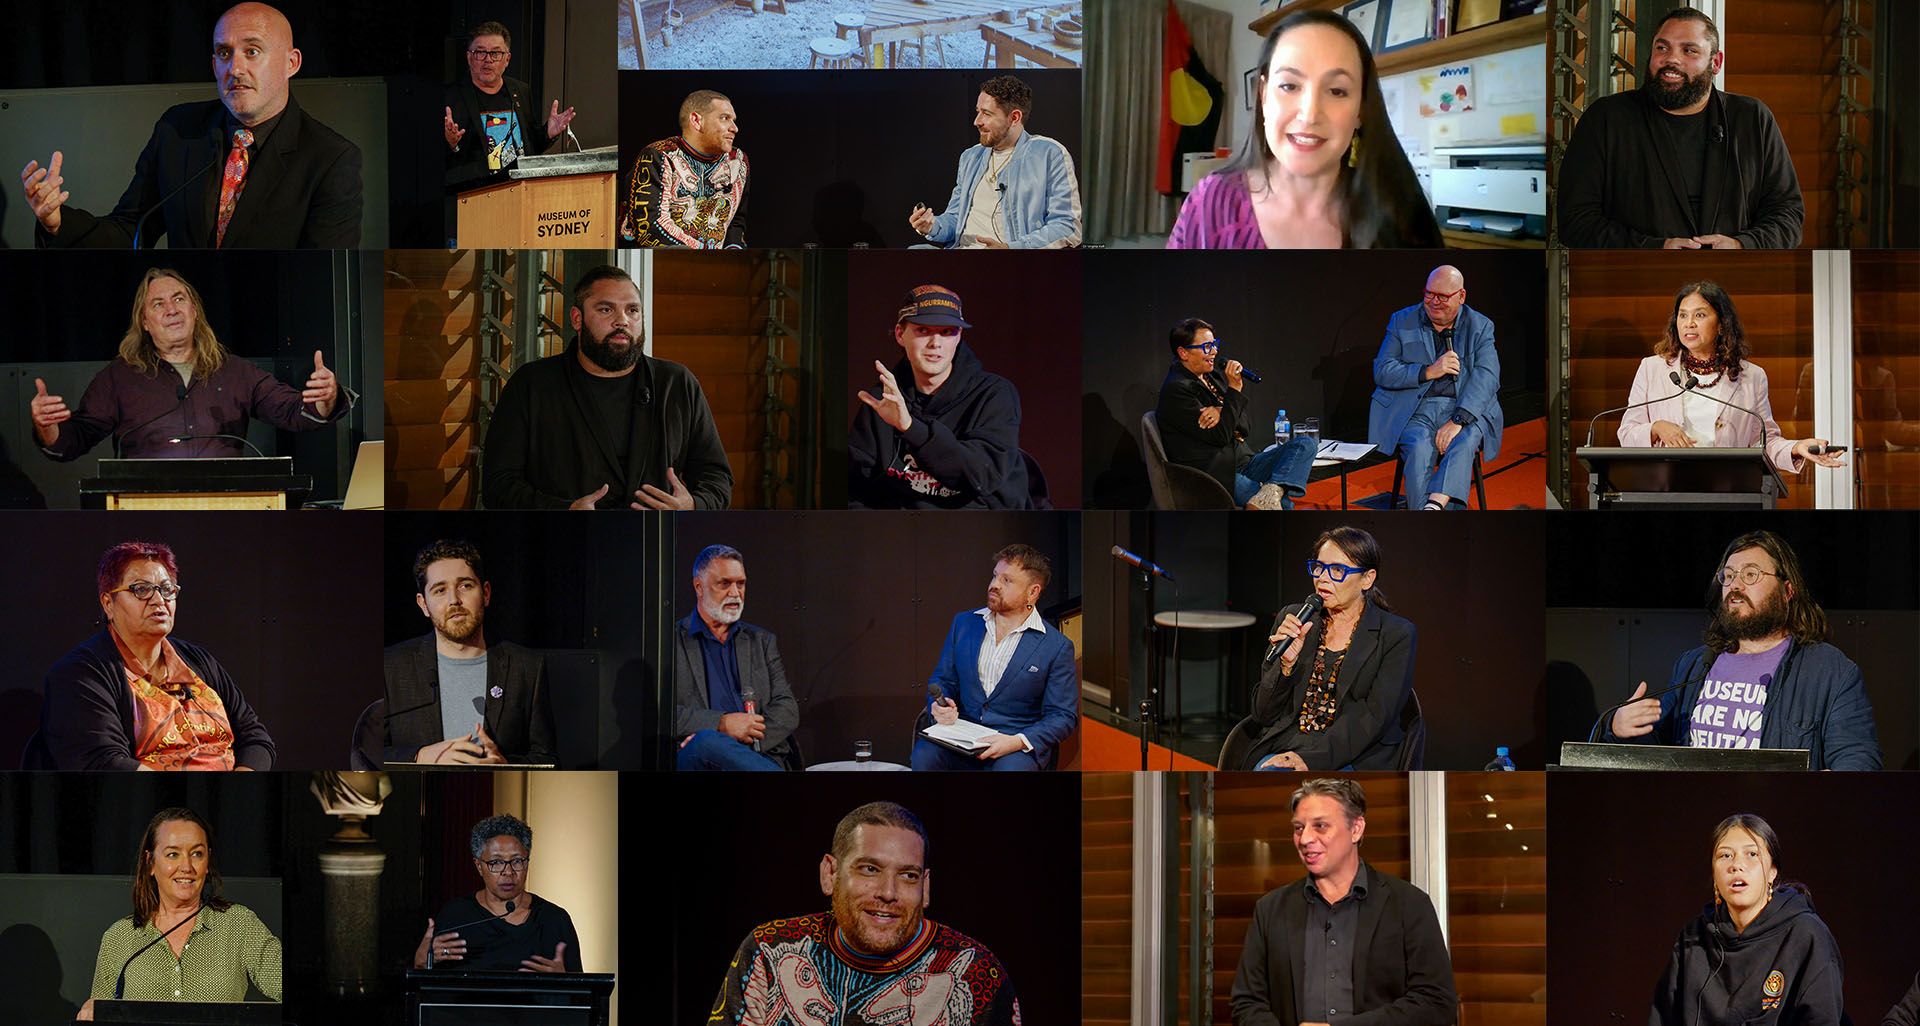 A collage of different speakers and presenters from the First Nations Speaker Series